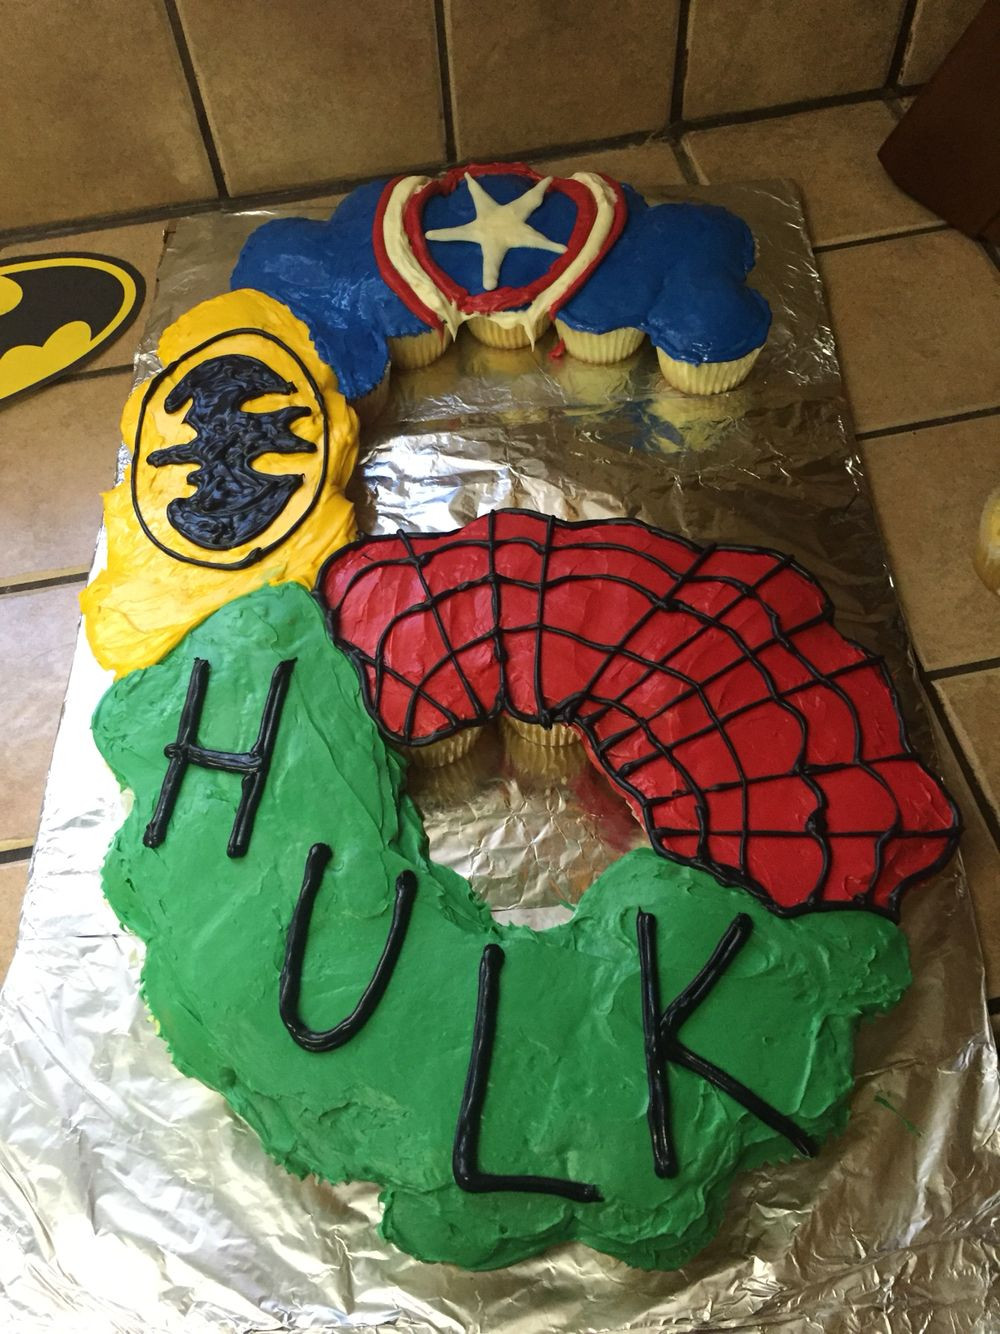 Six Year Old Birthday Party Ideas
 Superhero cake made from cupcakes for a 6 year old s